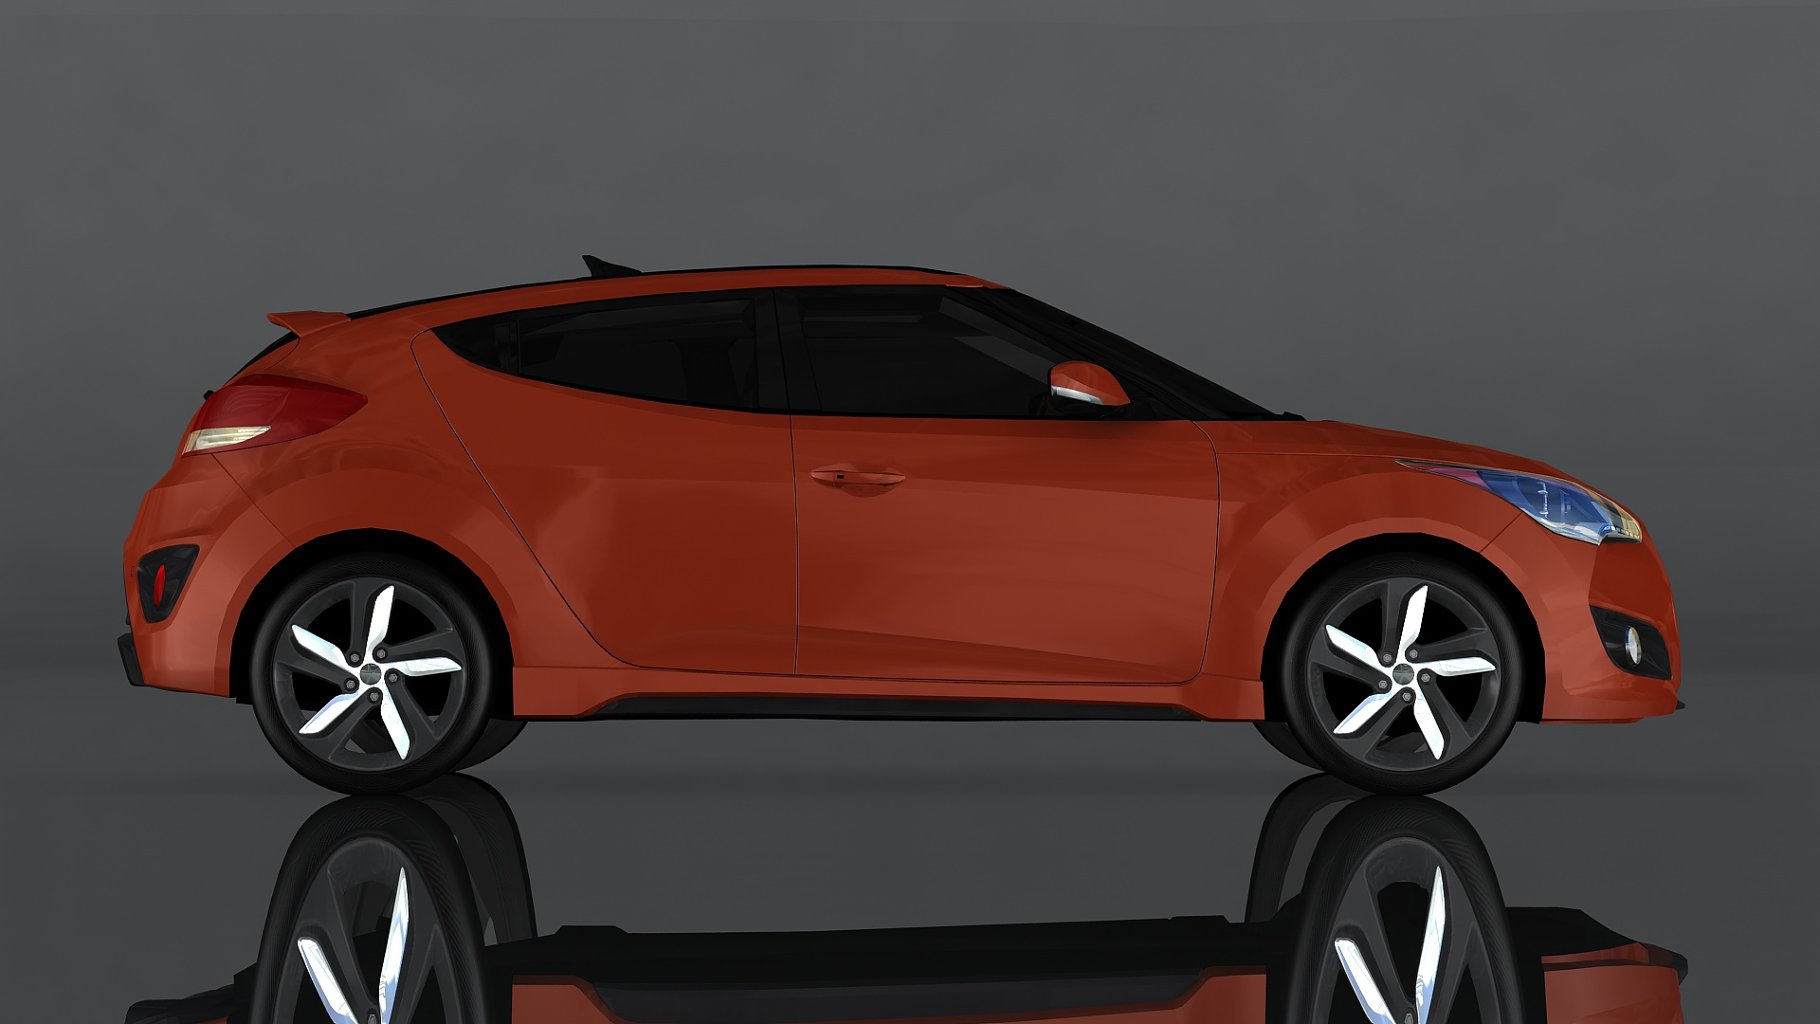 Mockup in the side of hyundai veloster car.